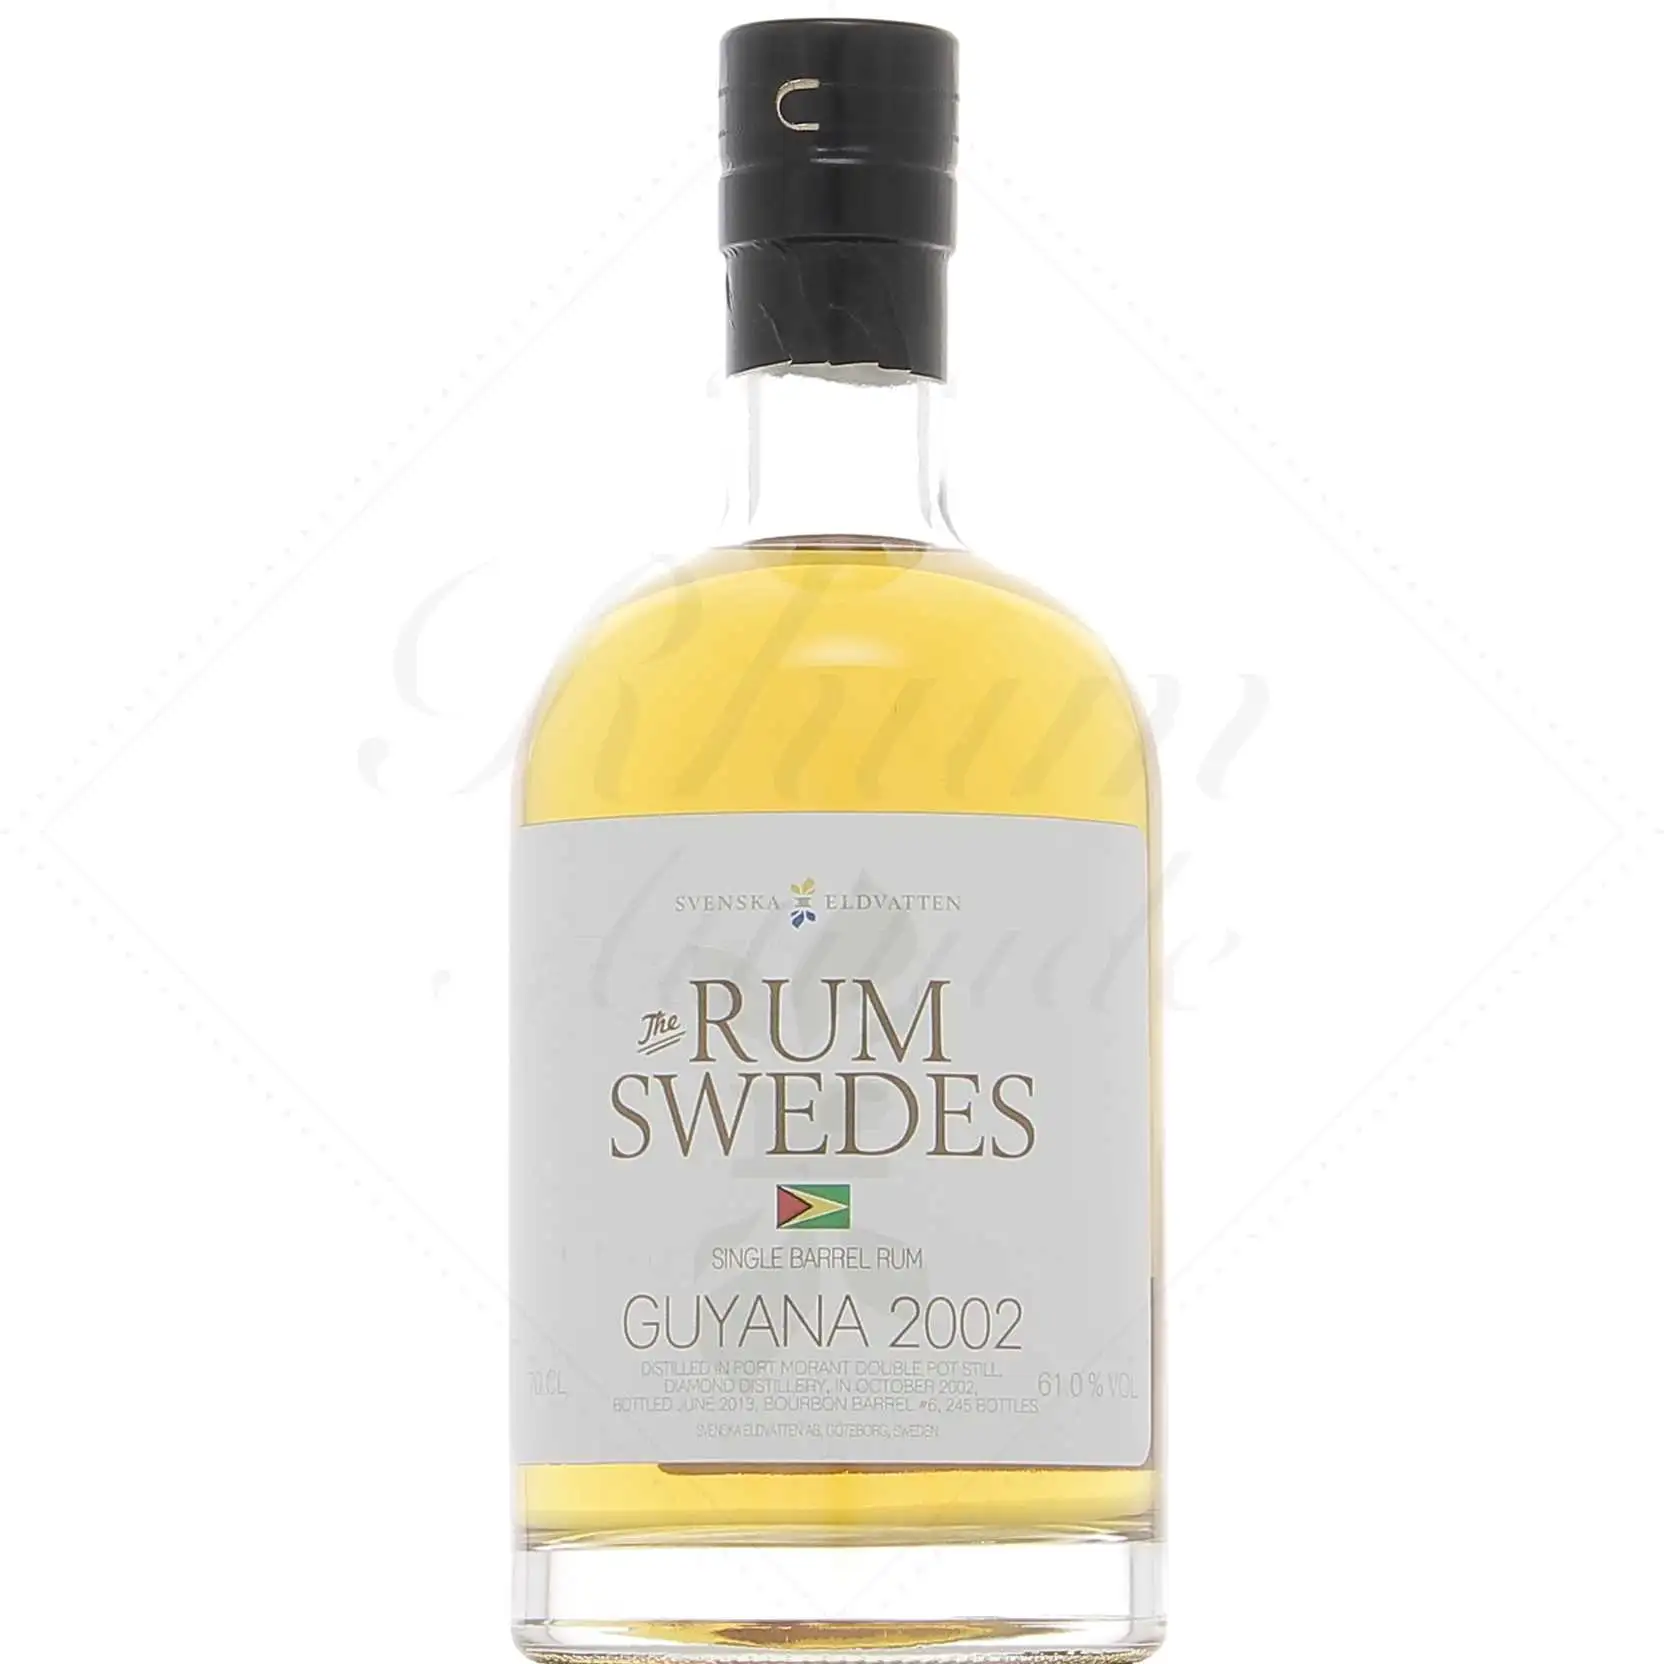 Image of the front of the bottle of the rum The Rum Swedes